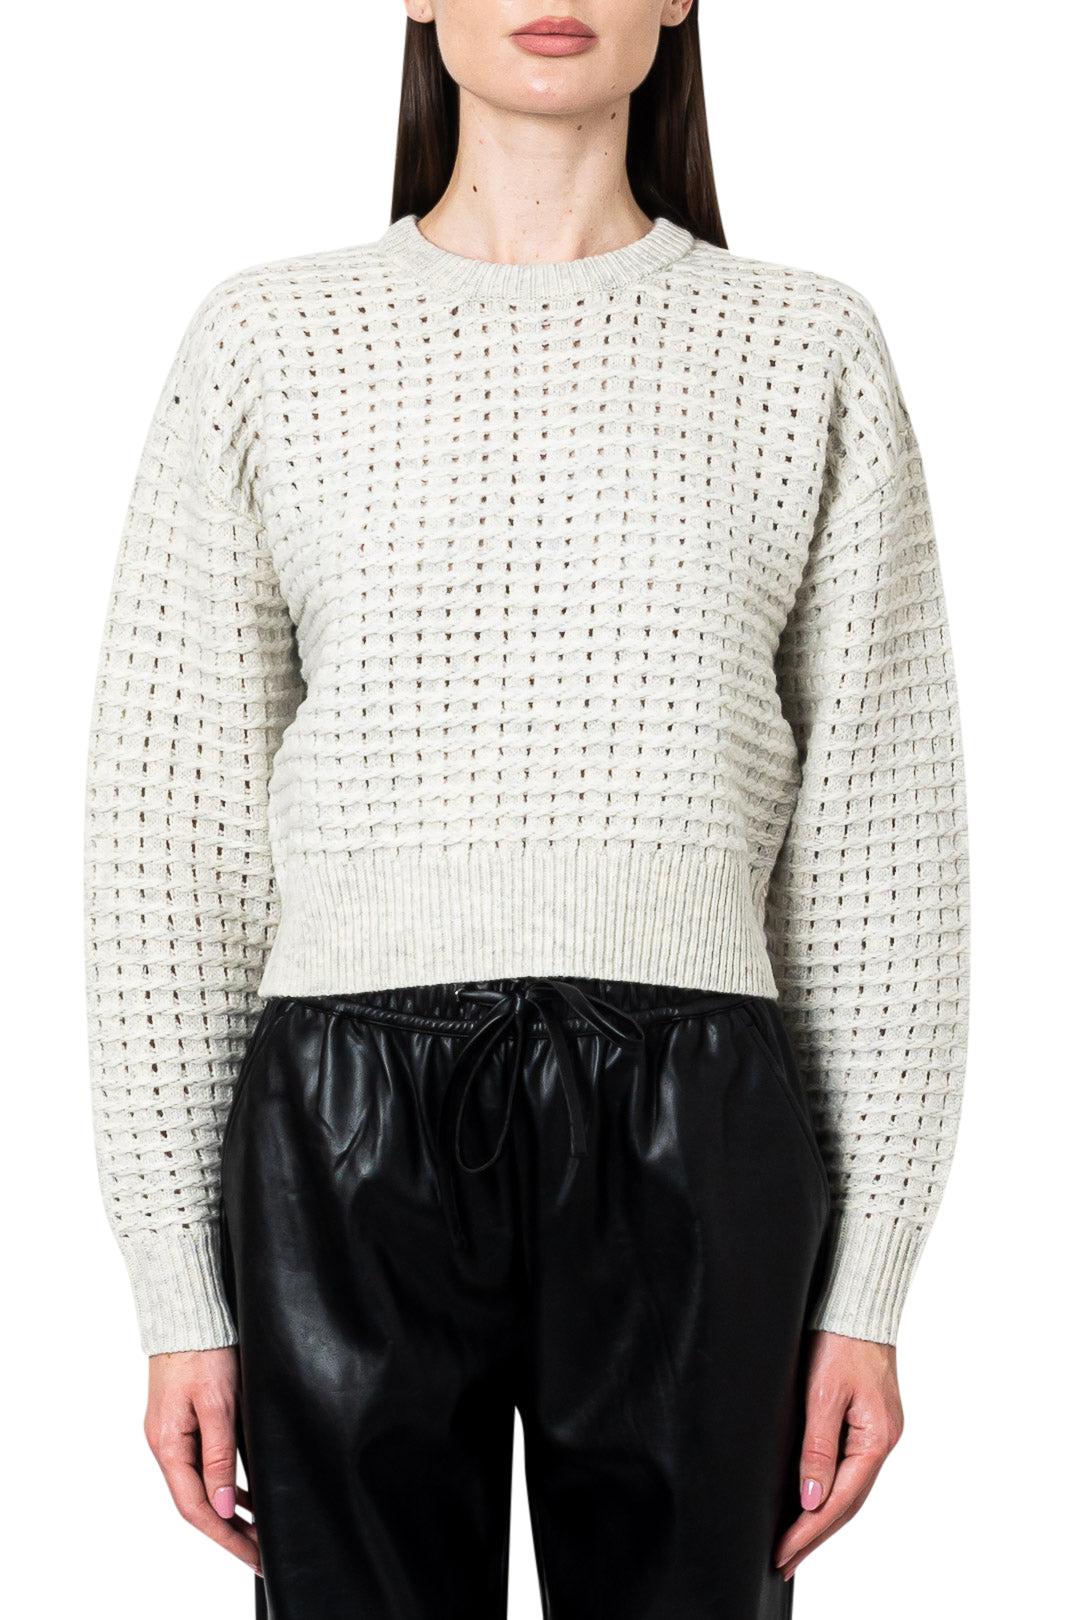 Designers Remix-Knit wool sweater-18284-dgallerystore